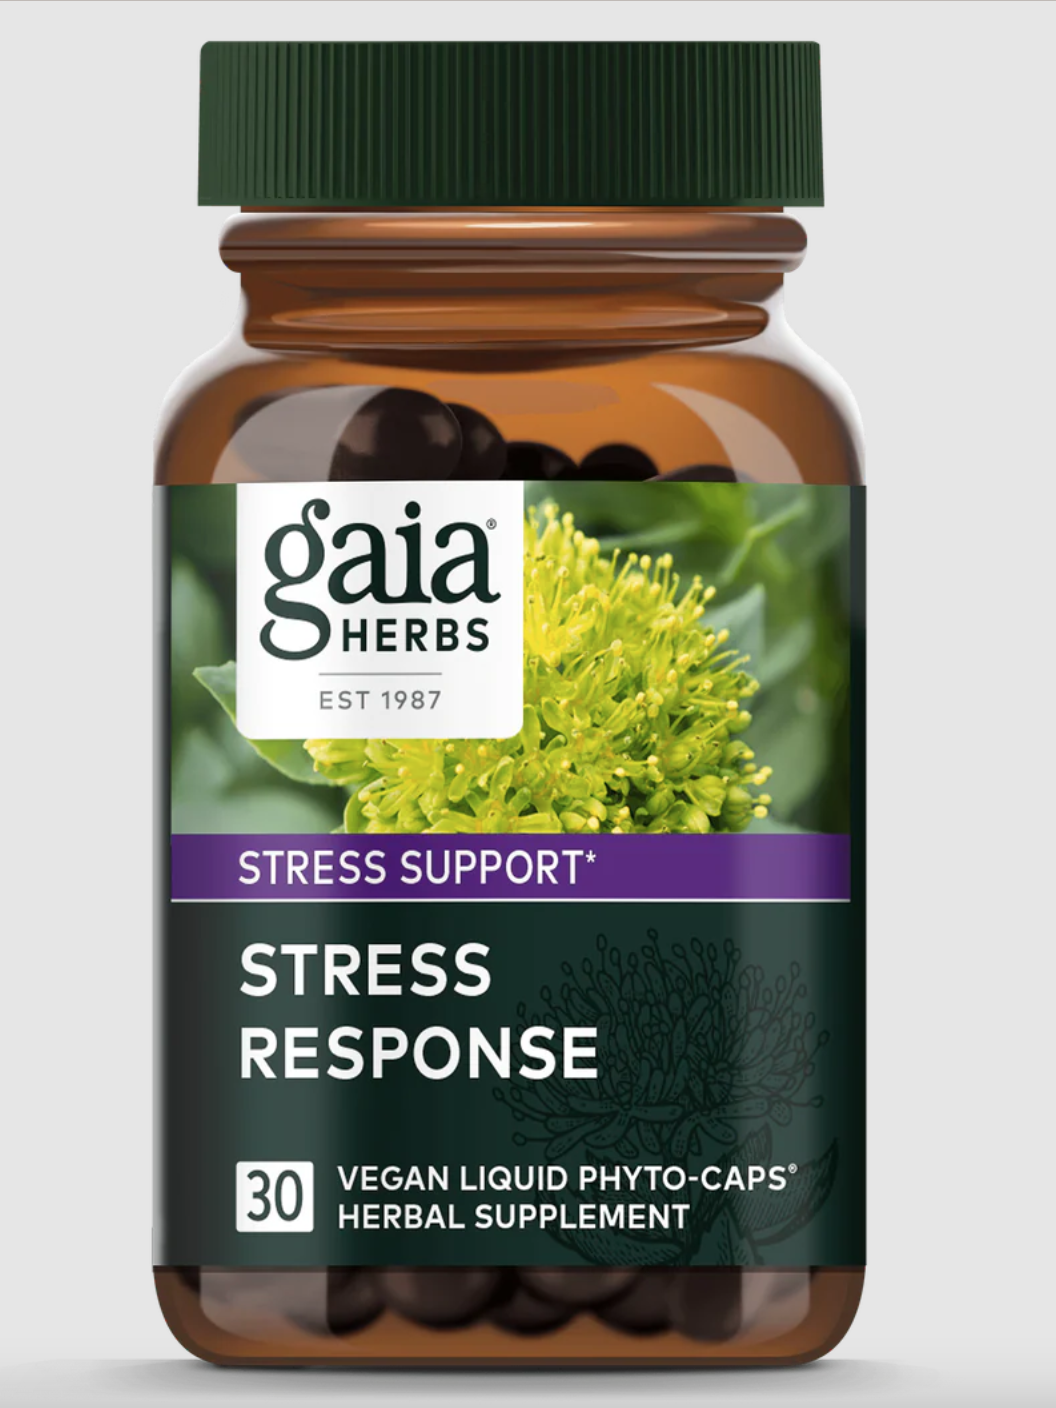 Hormone supplements from Gaia Herbs